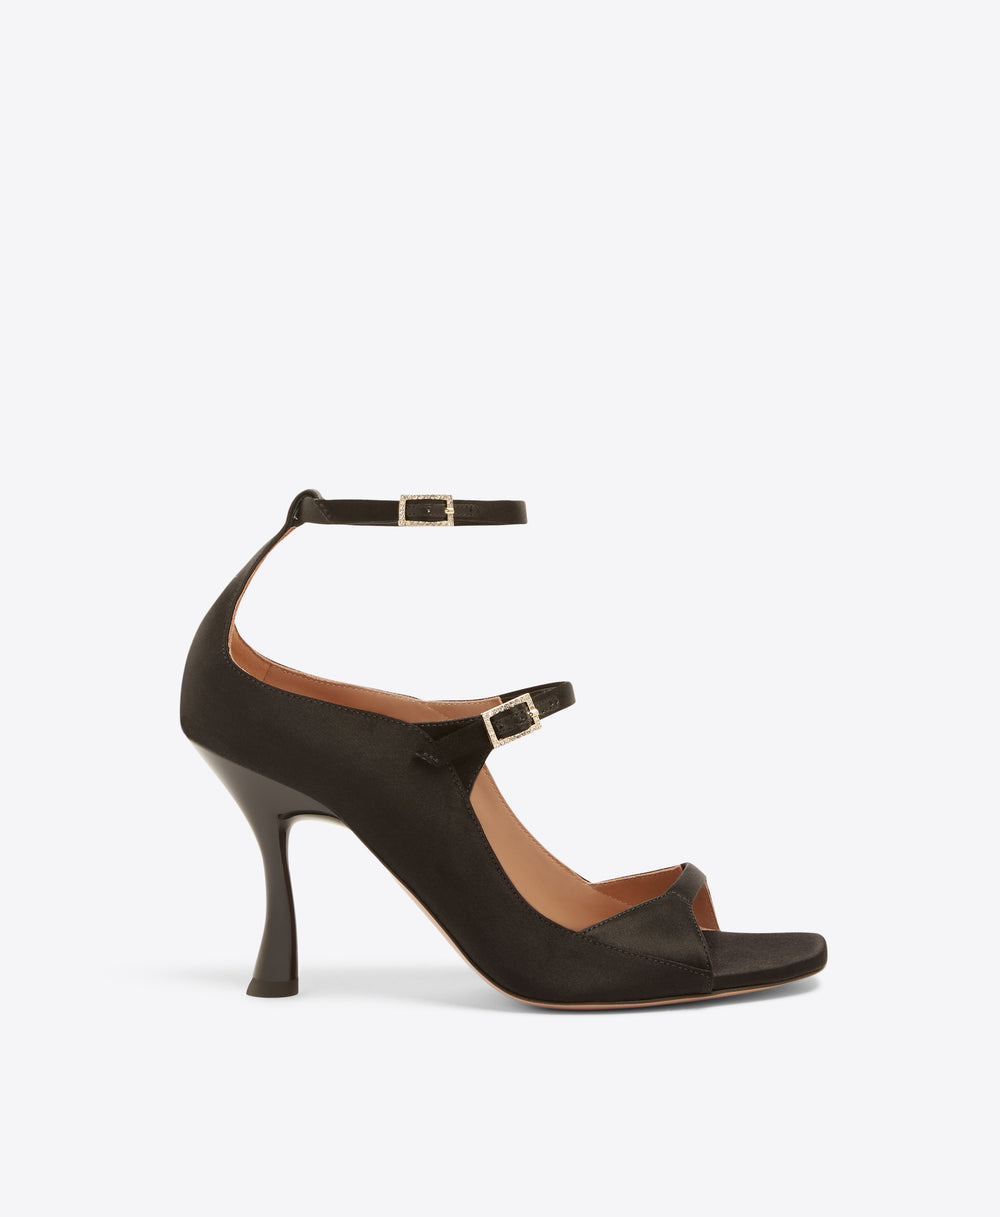 Riley 90 Black Satin Heeled Sandals Malone Souliers